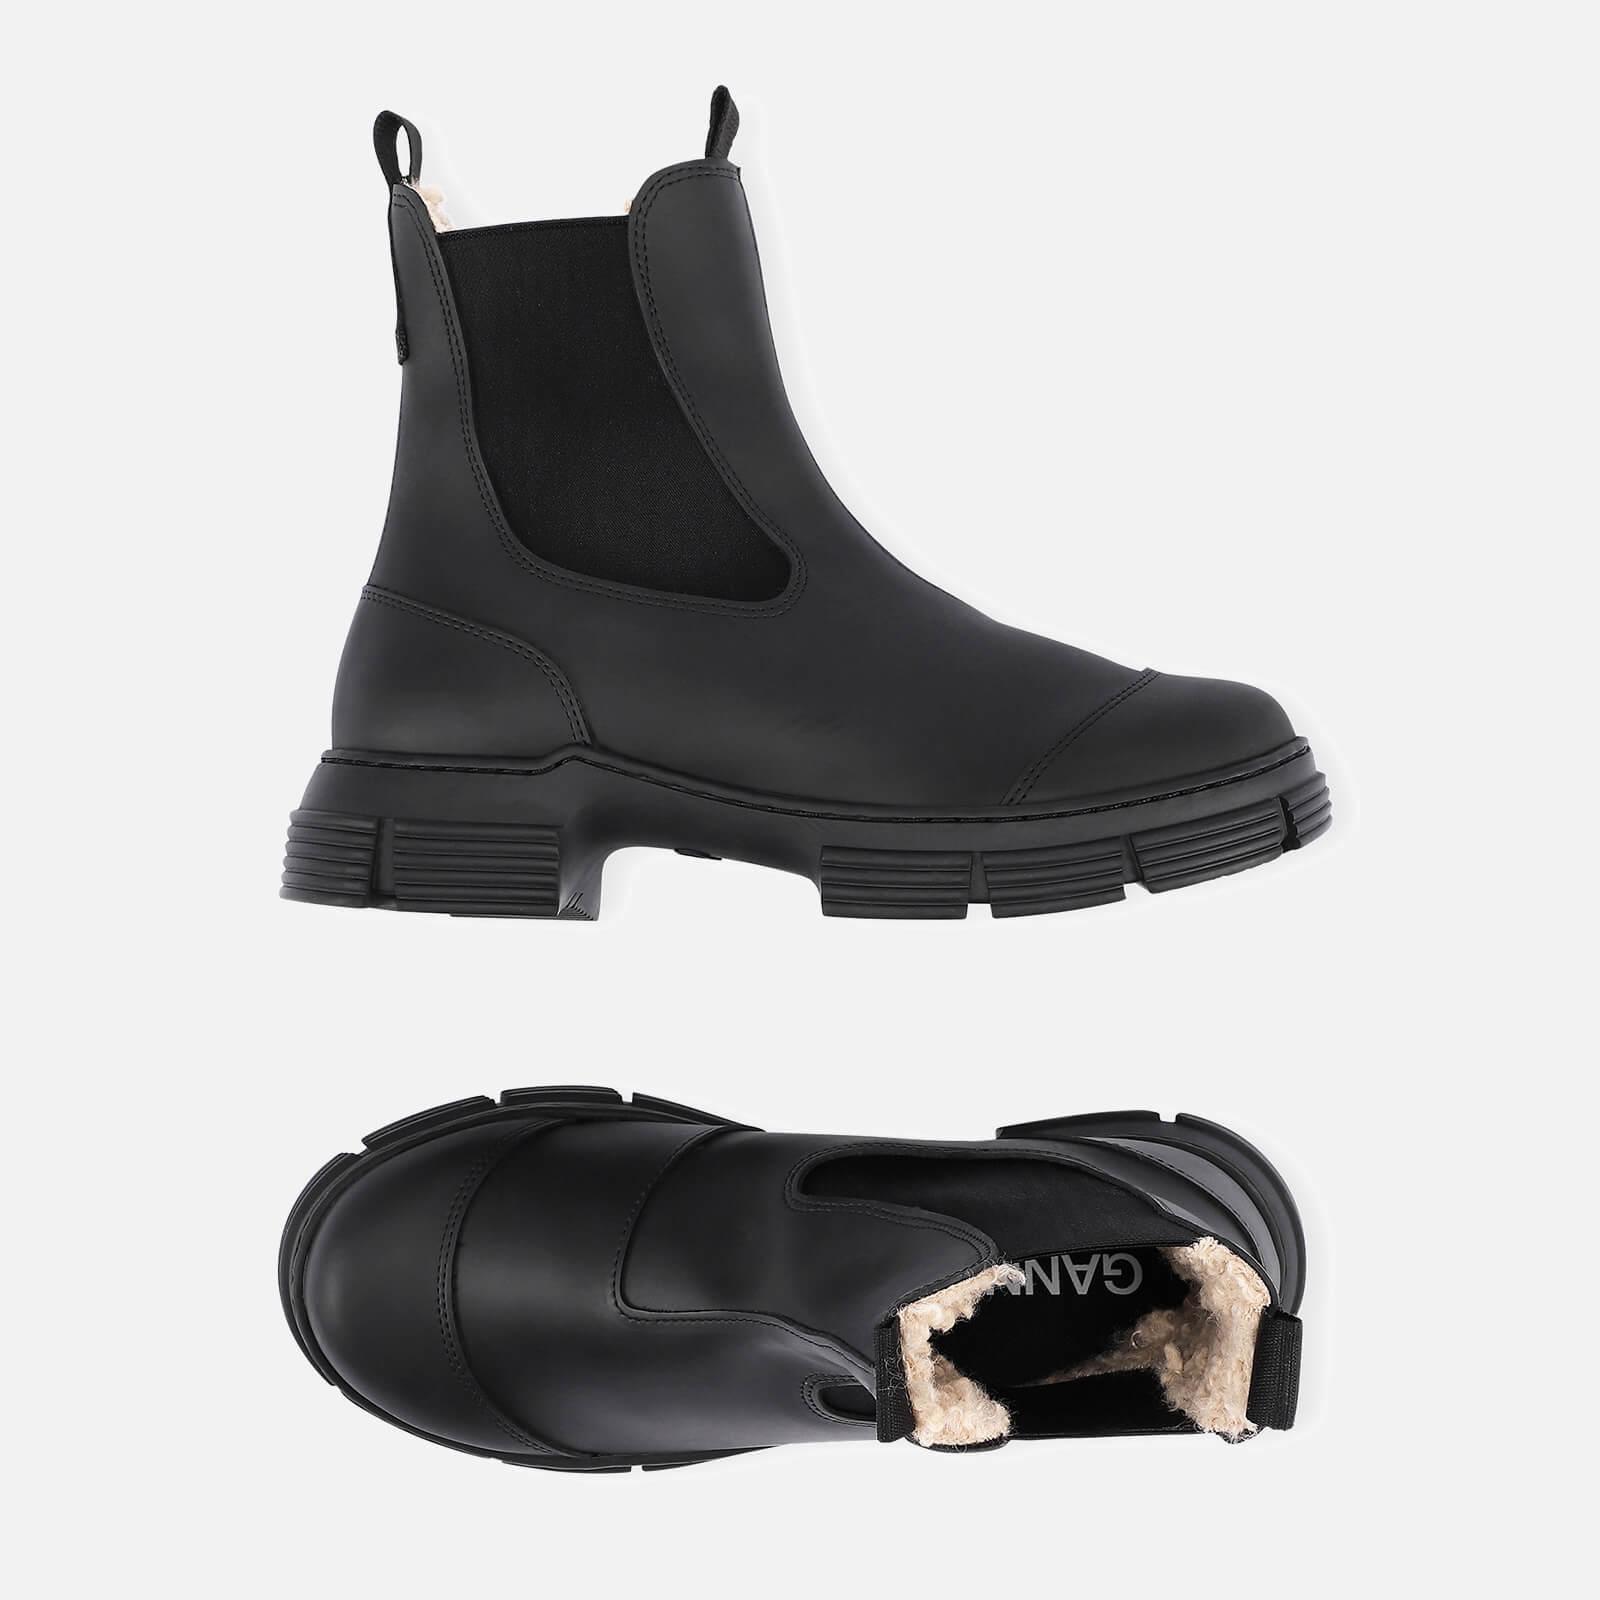 Ganni Recycled Rubber/fur Lined Chelsea Boots in Black | Lyst